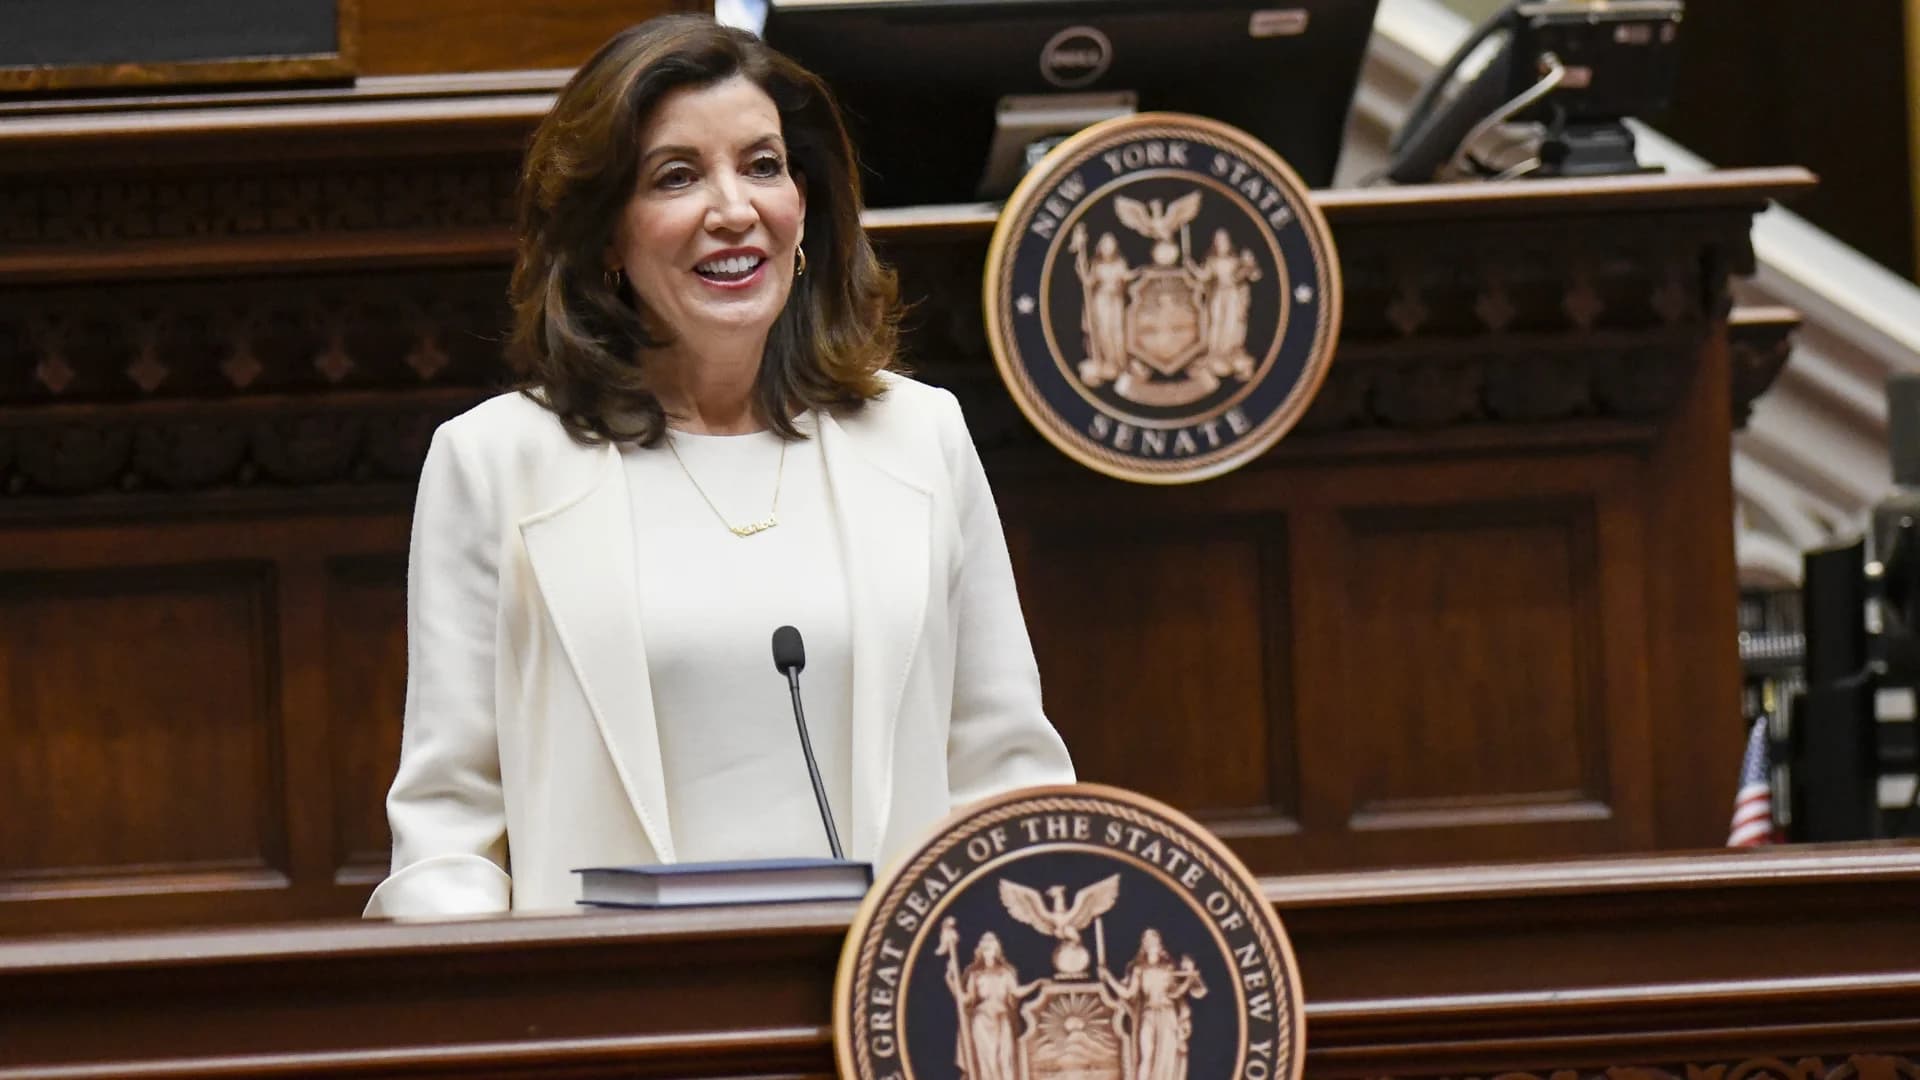 WATCH: Gov. Hochul delivers State of the State address